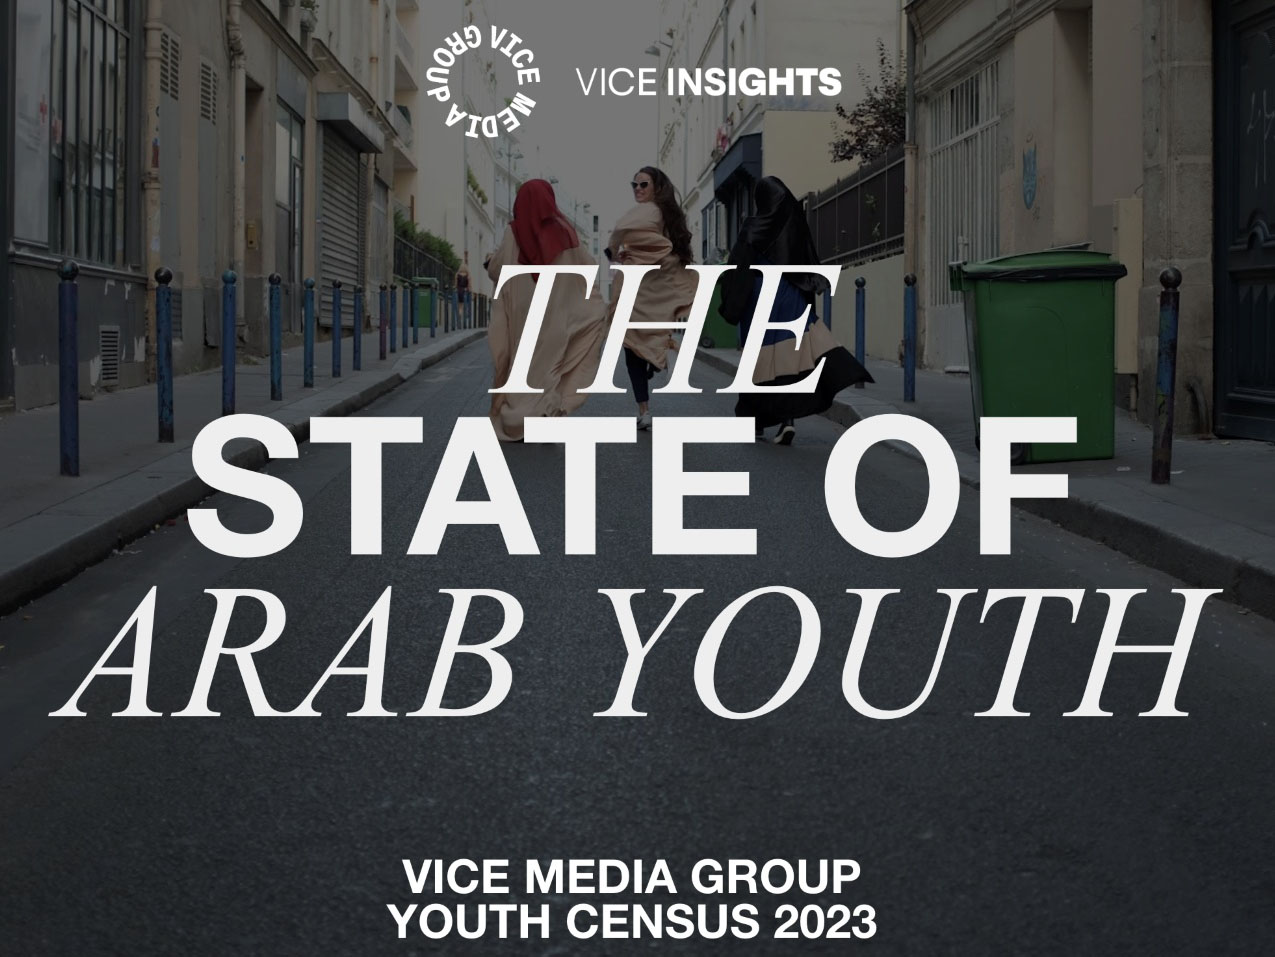 VICE Media Group unveils 'The State of Arab Youth' survey